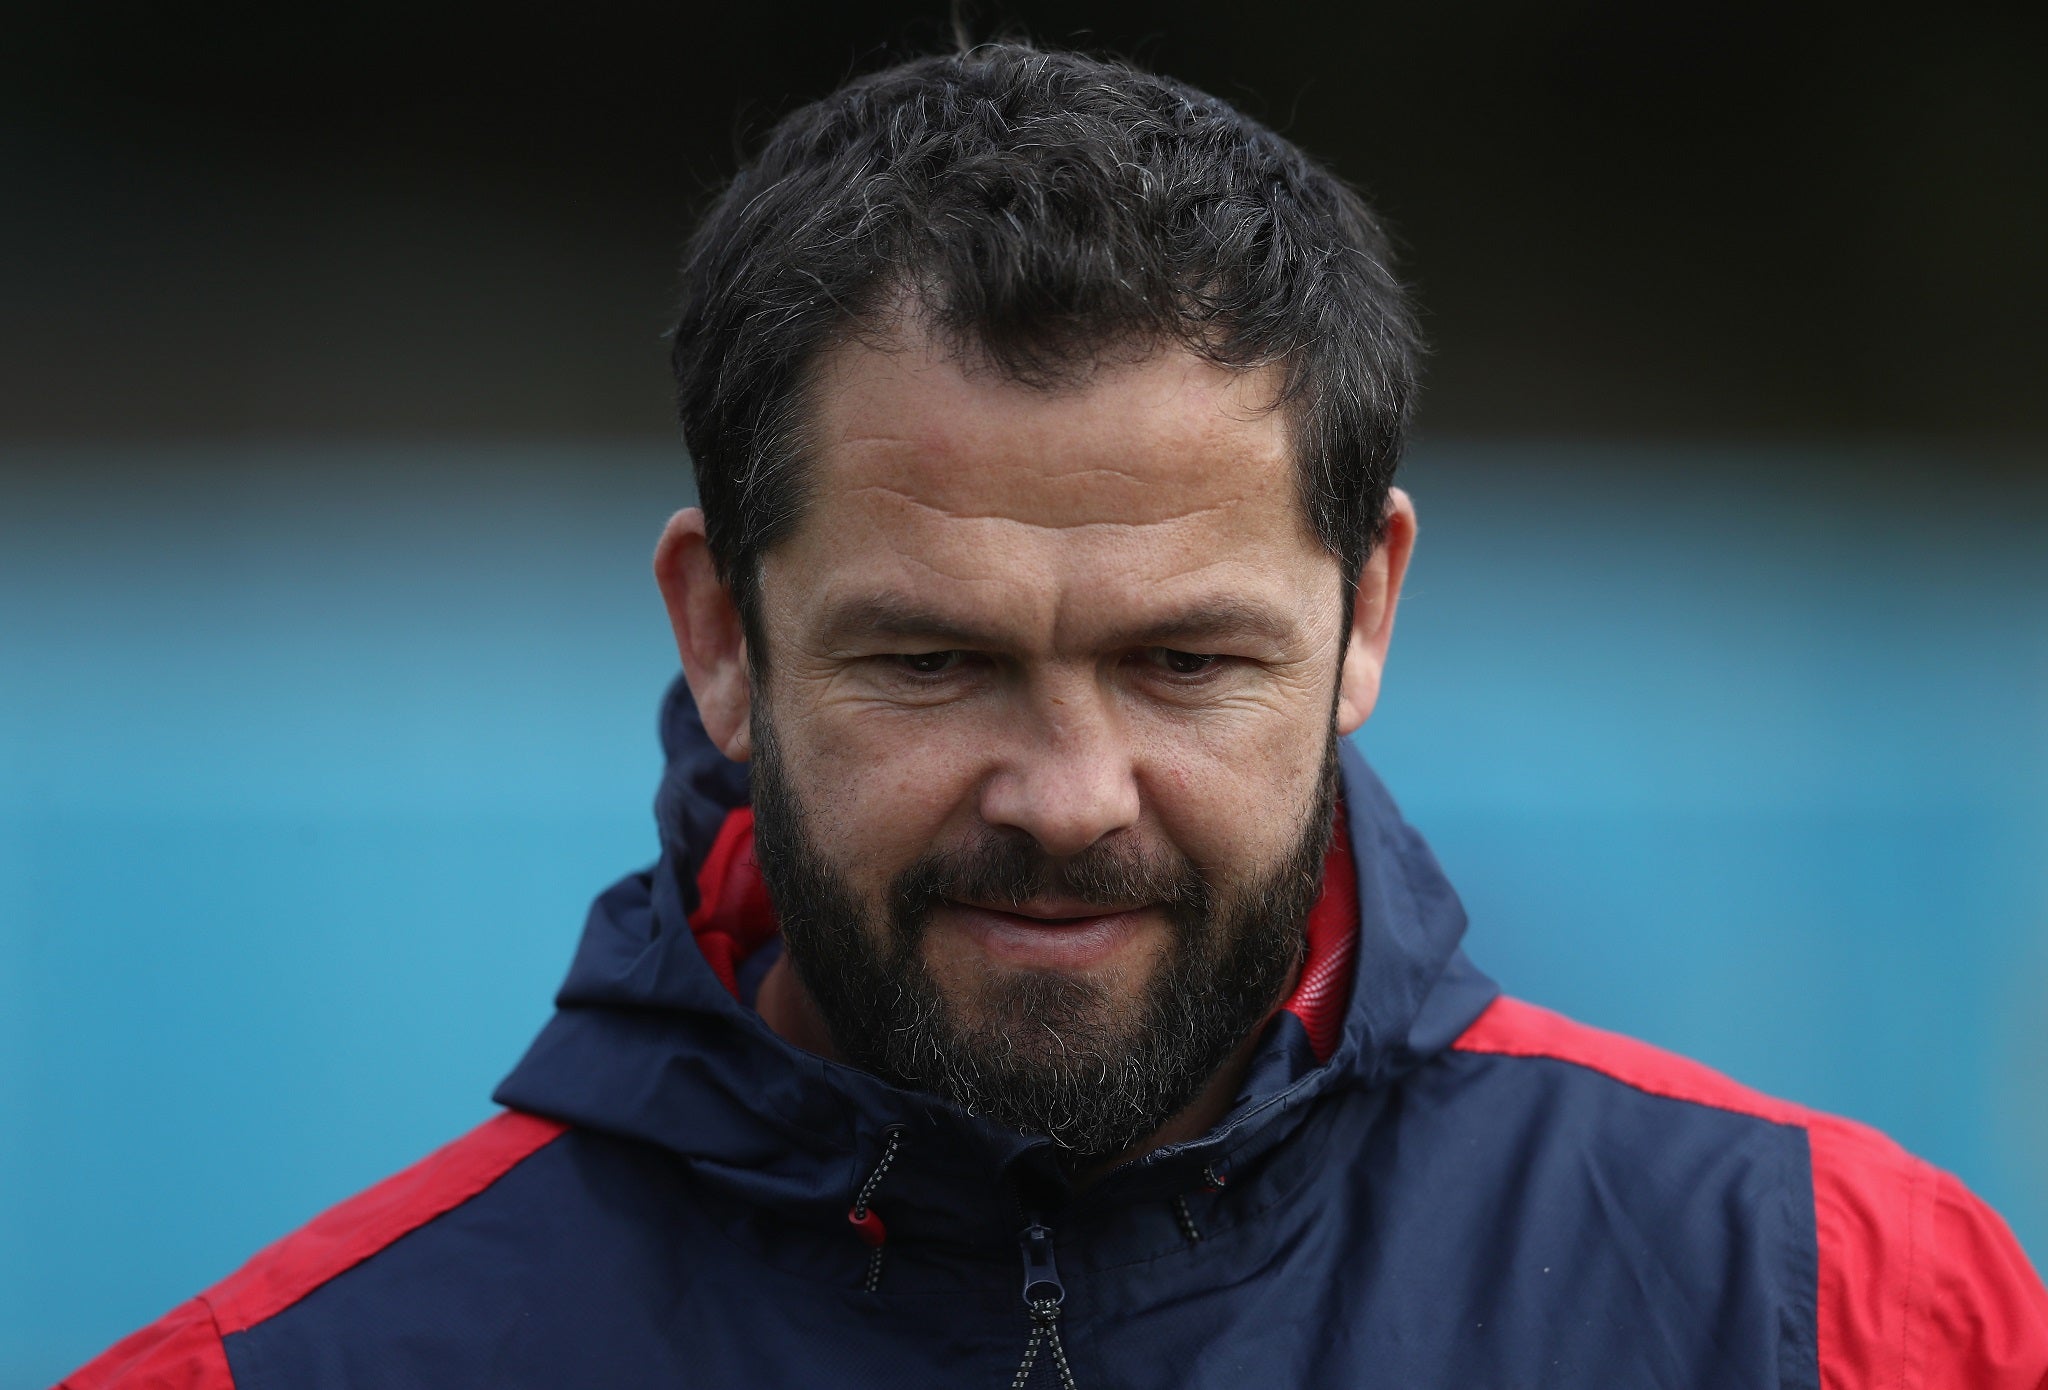 Andy Farrell can barely keep a lid on his own emotions ahead of the second Test